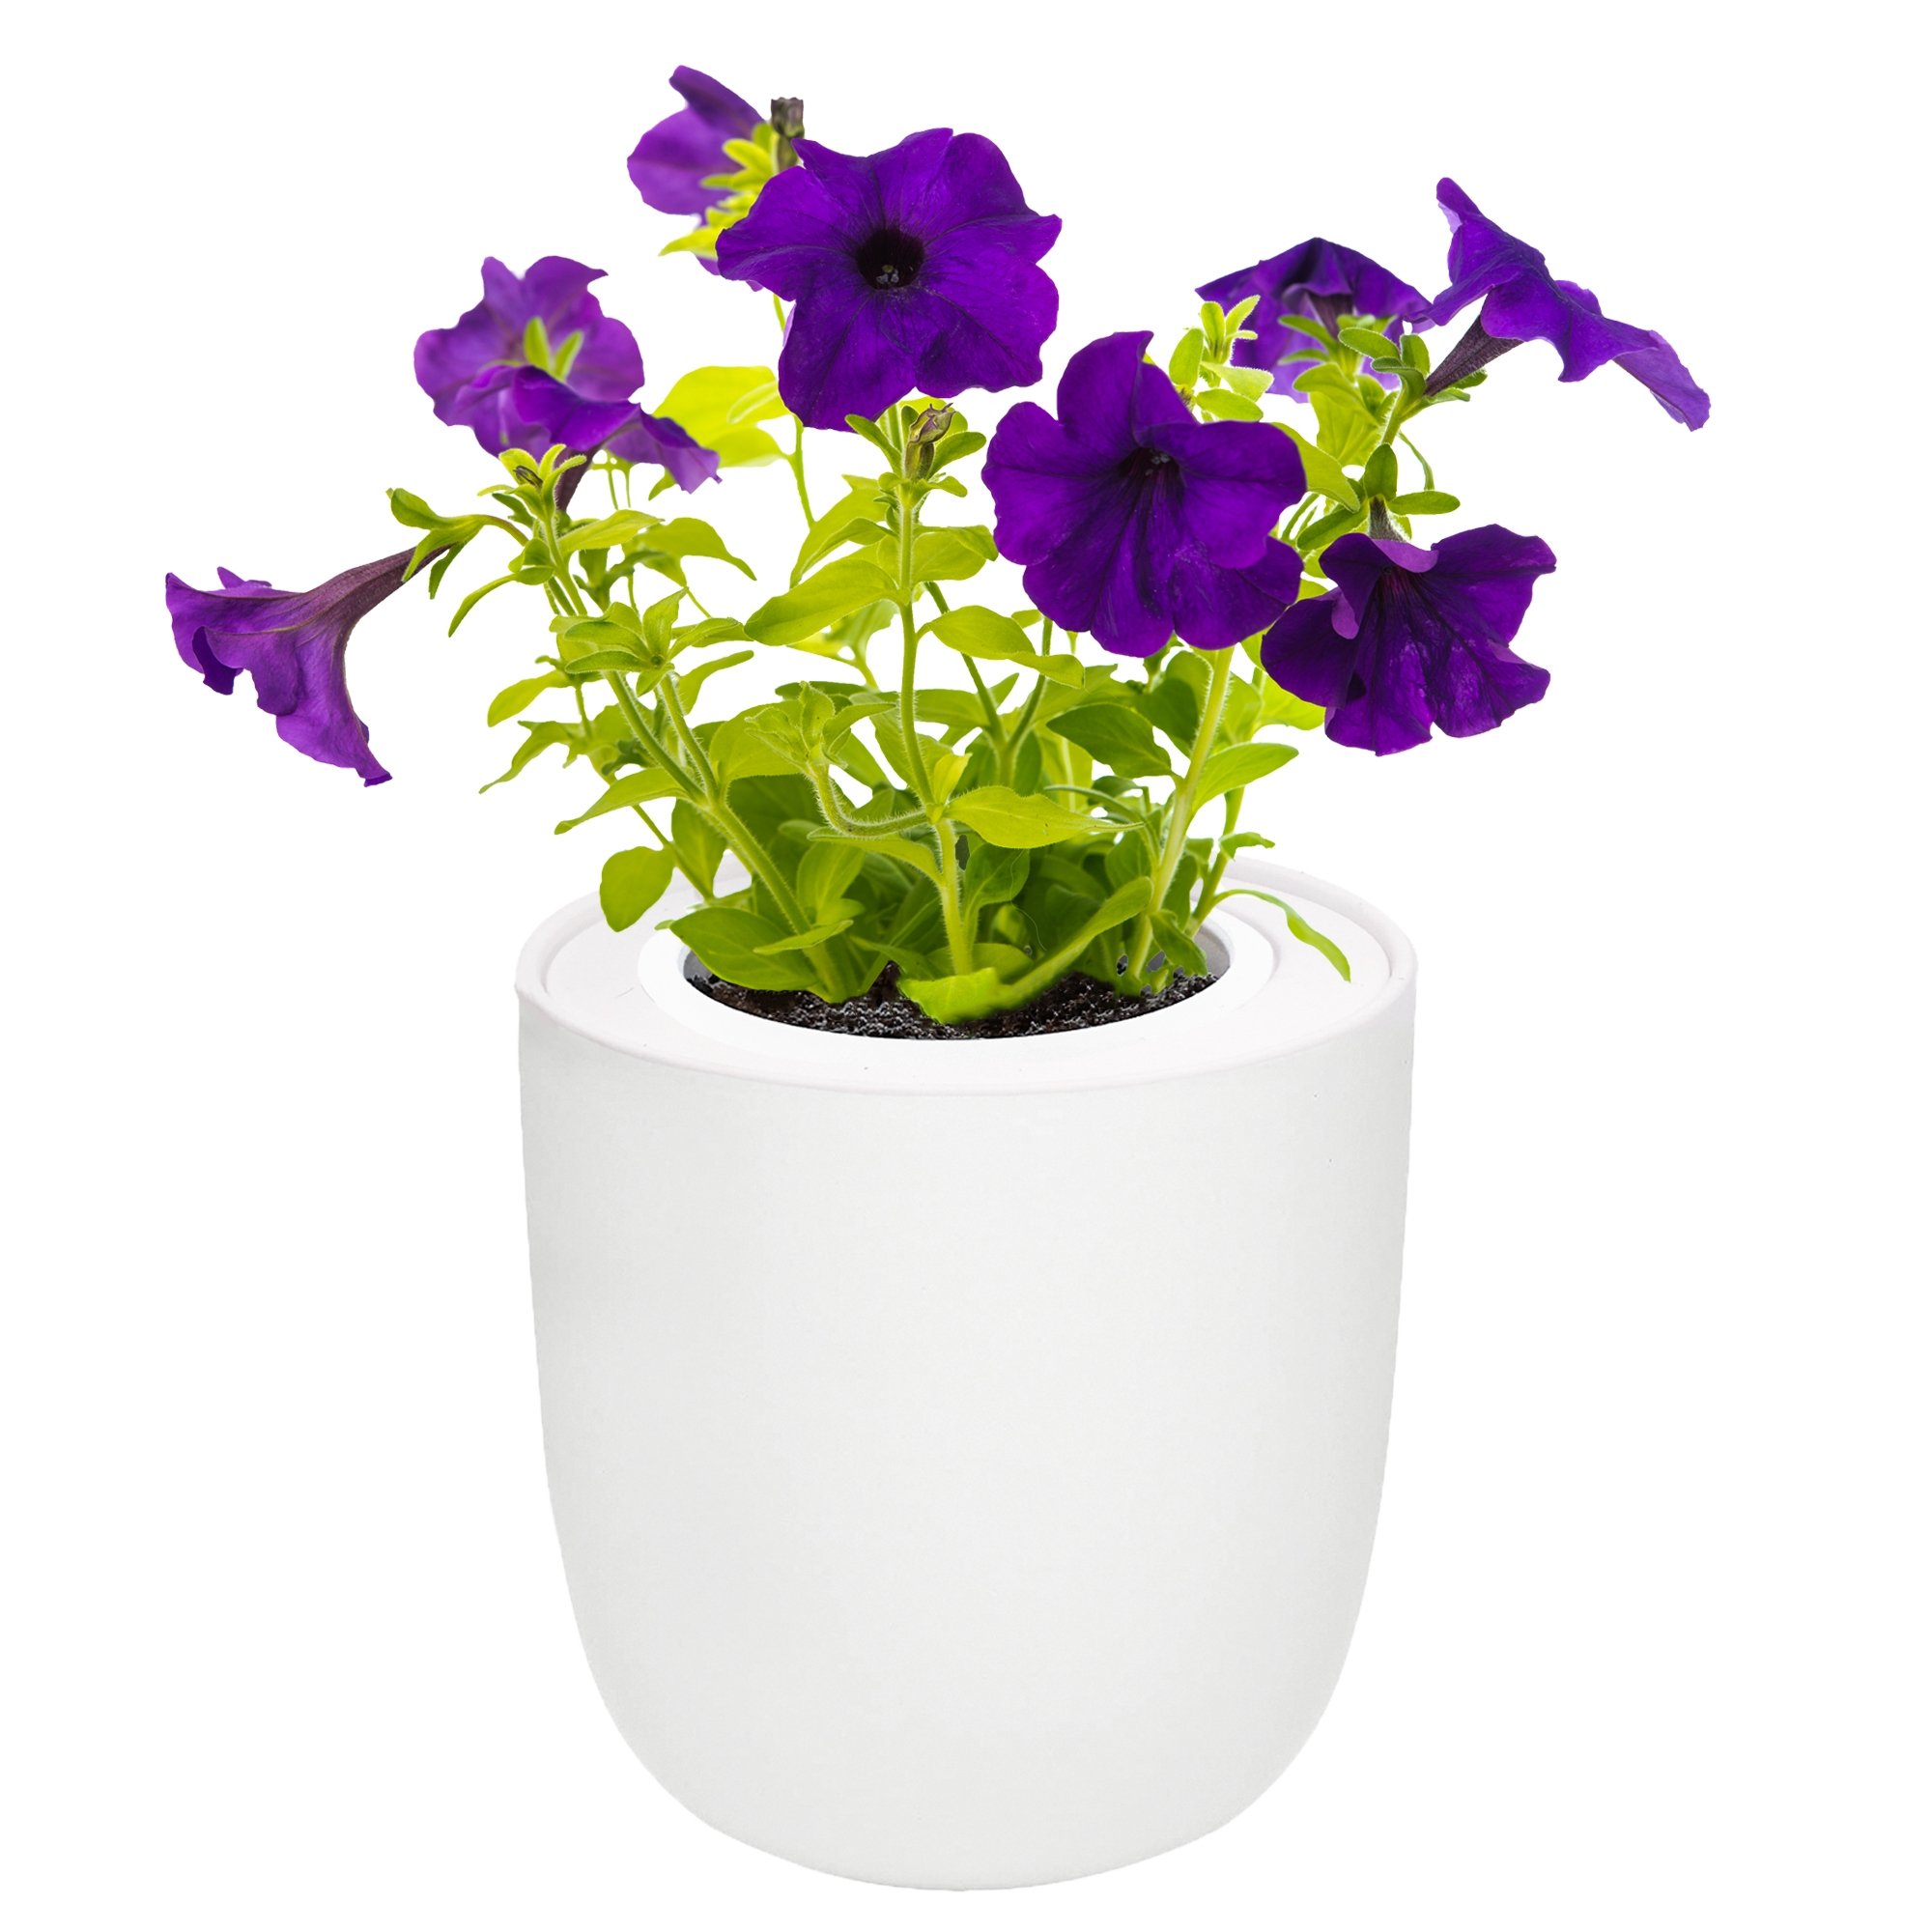 Viola - Johnny Jump Up White Ceramic Pot Hydroponic Growing Kit with Seeds